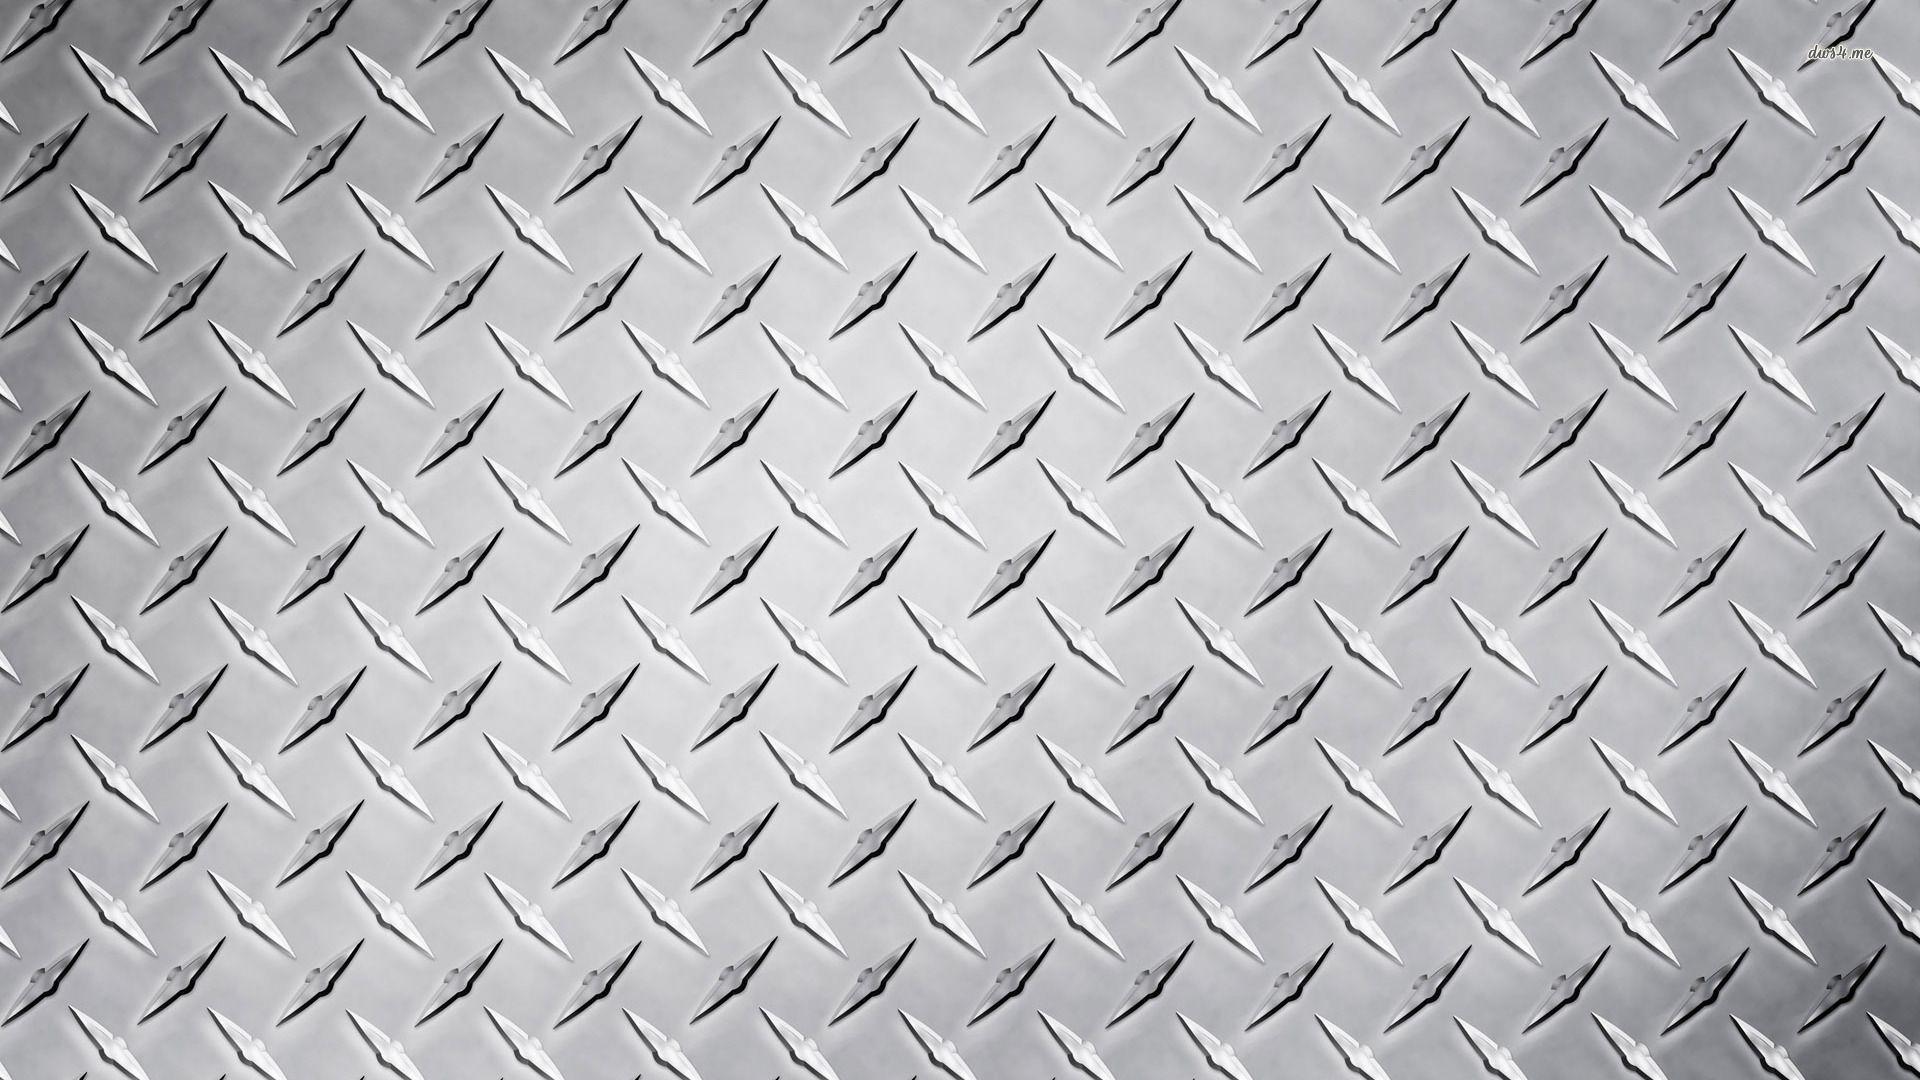 Awesome Diamond Plate HD Wallpaper Free Download